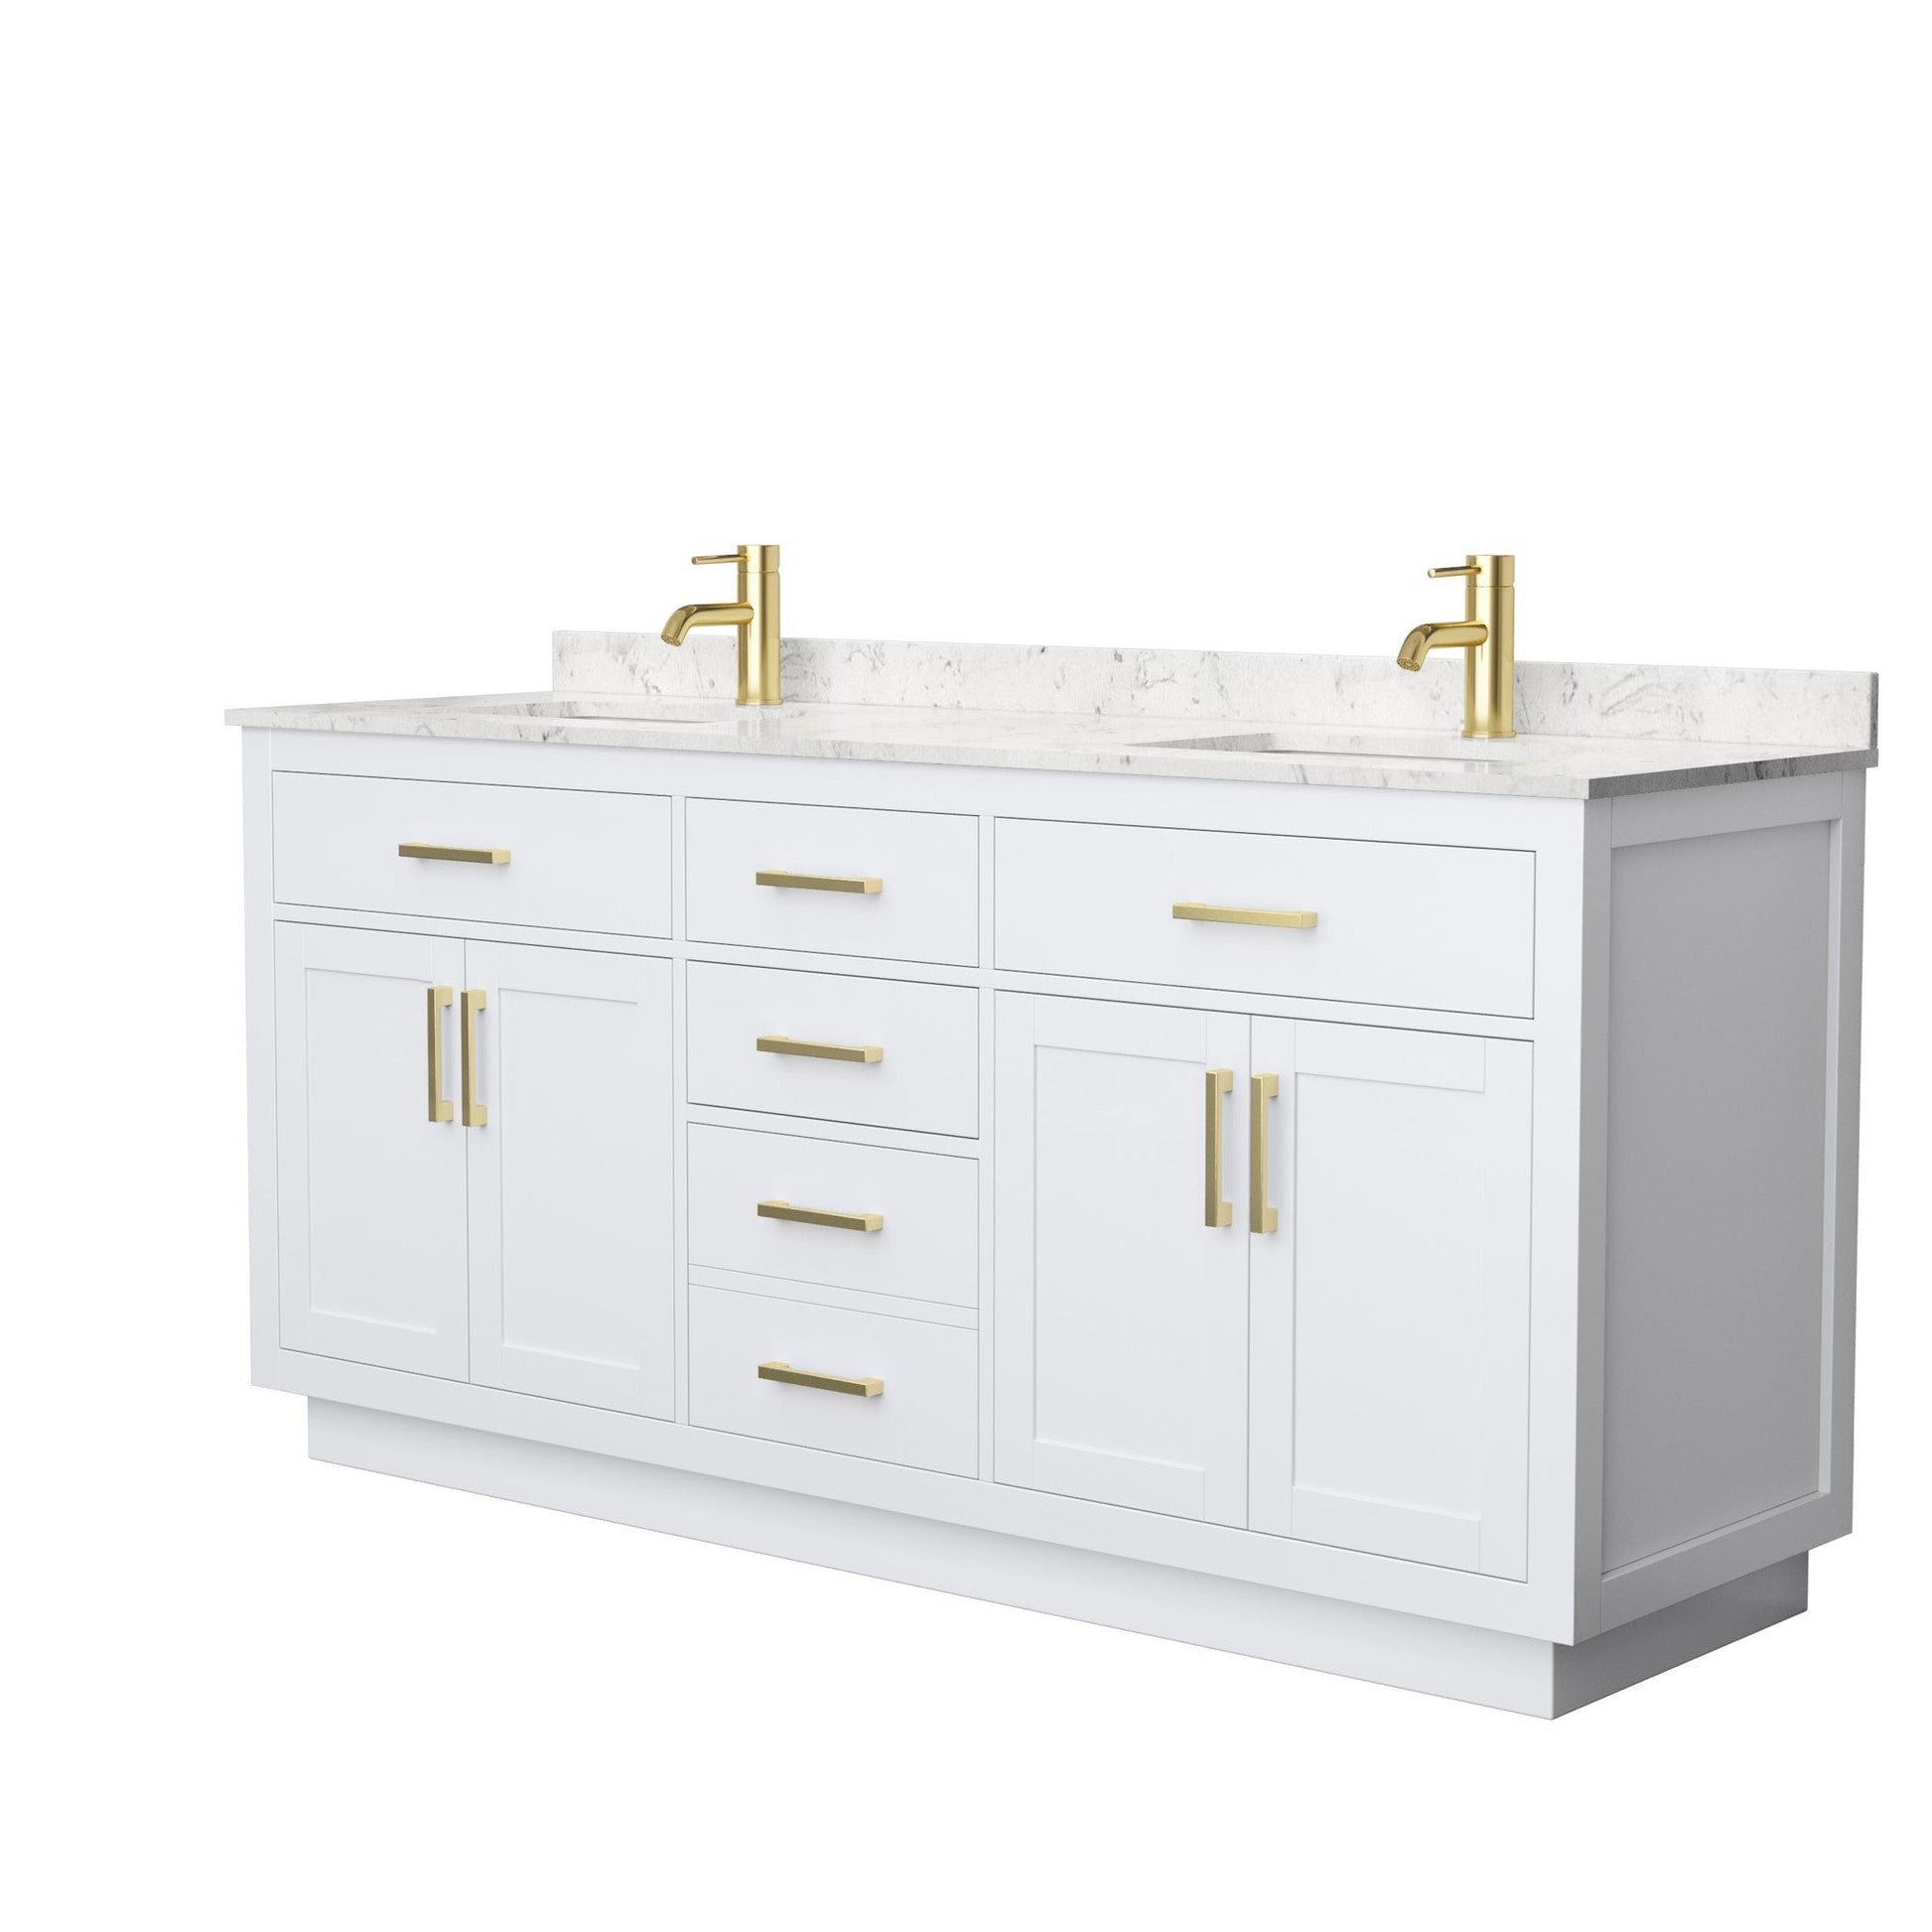 Beckett 72" Double Bathroom Vanity With Toe Kick in White, Carrara Cultured Marble Countertop, Undermount Square Sinks, Brushed Gold Trim